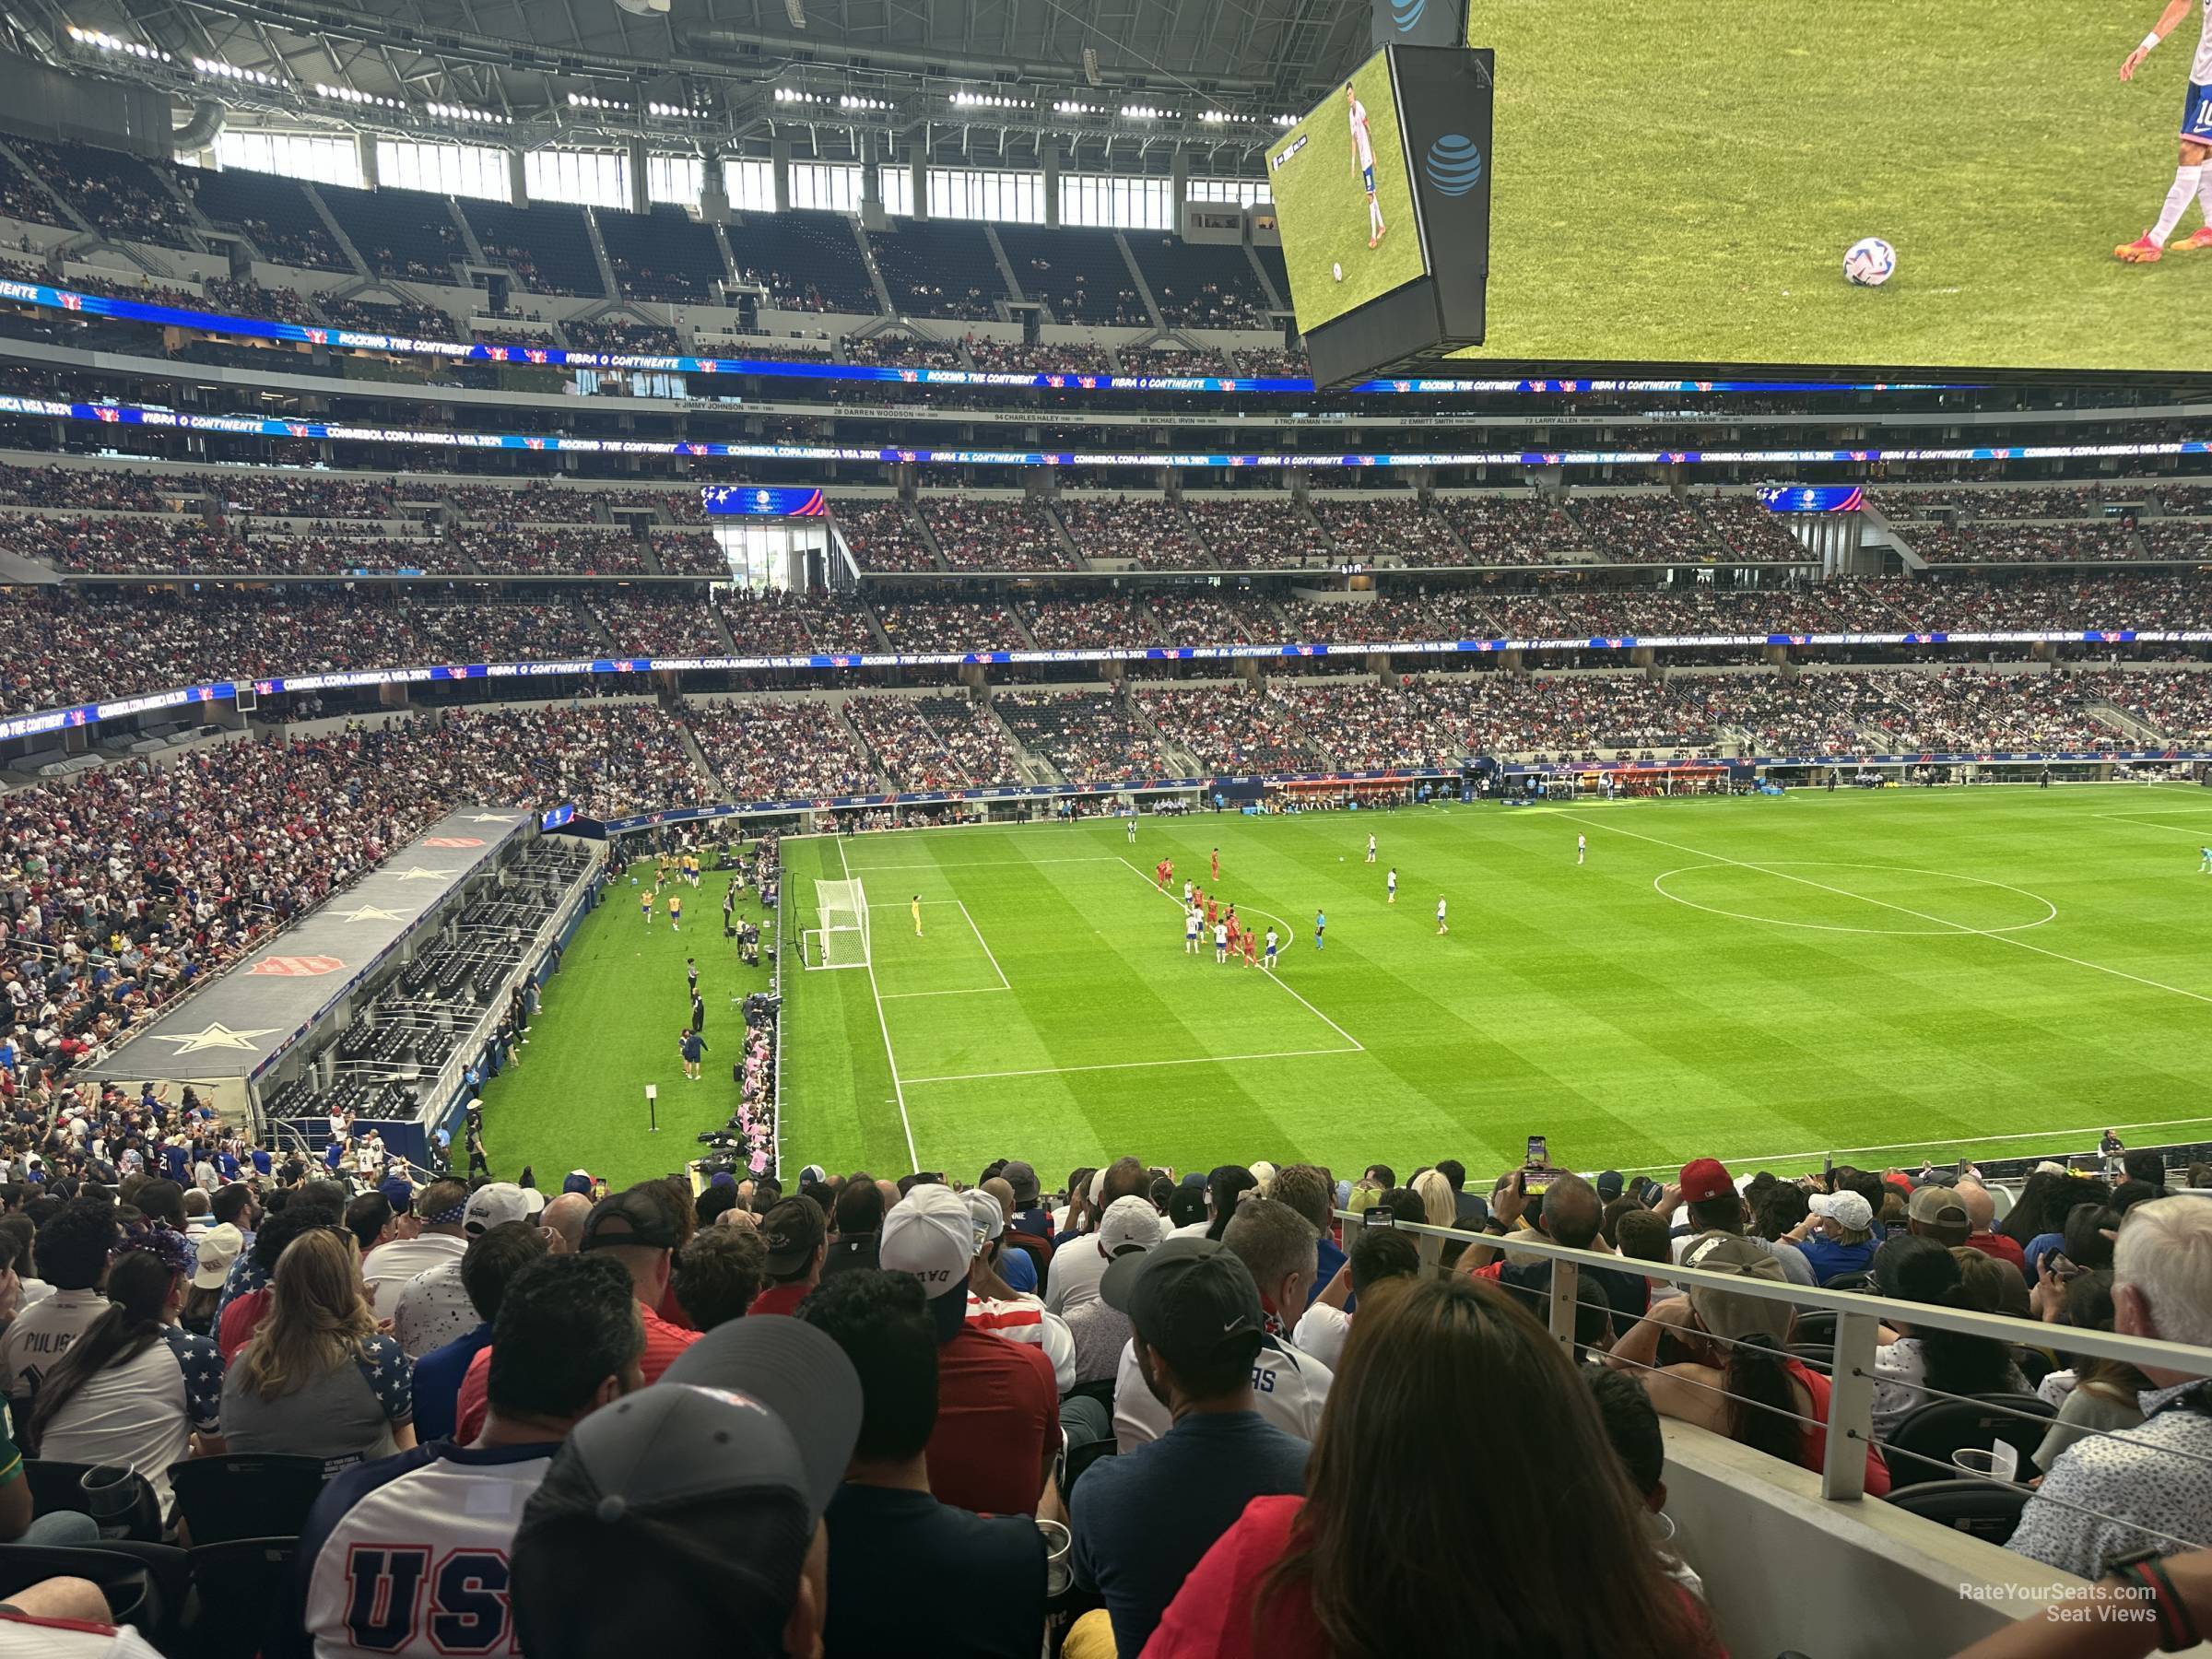 section 215, row 14 seat view  for soccer - at&t stadium (cowboys stadium)